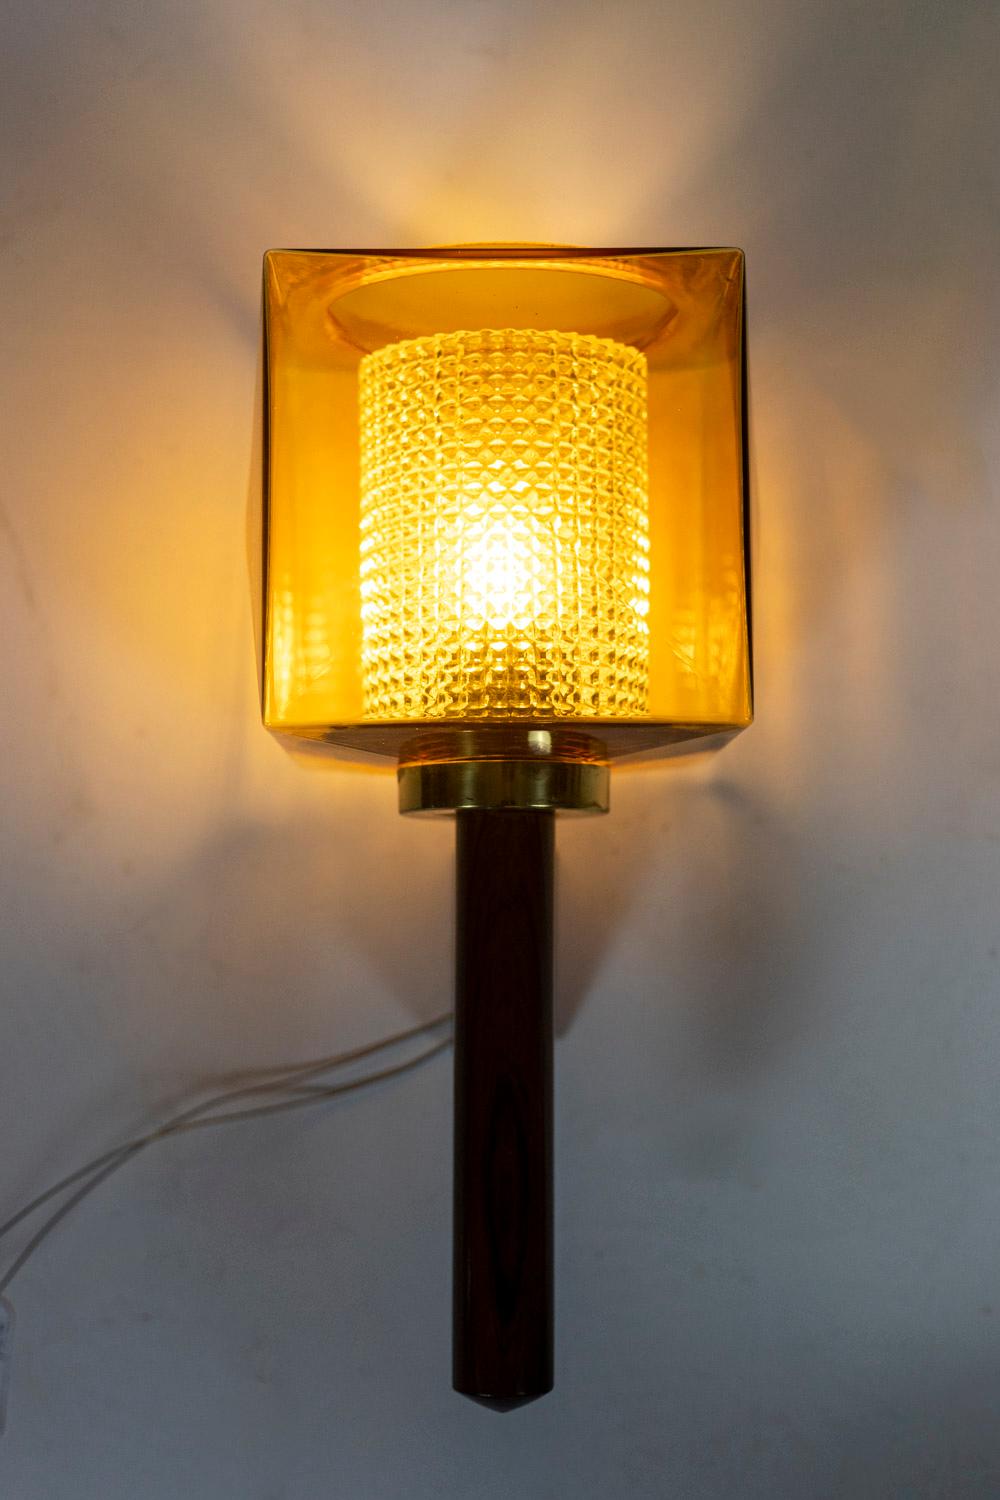 Carl Fagerlund, in the style of. 

Wall sconce in rosewood and glass, rectangular in shape. Granite glass, translucent and yellow in color.

Swedish work realized in the 1960s.

Dimensions : H 38 x W 18 x D 18 cm.